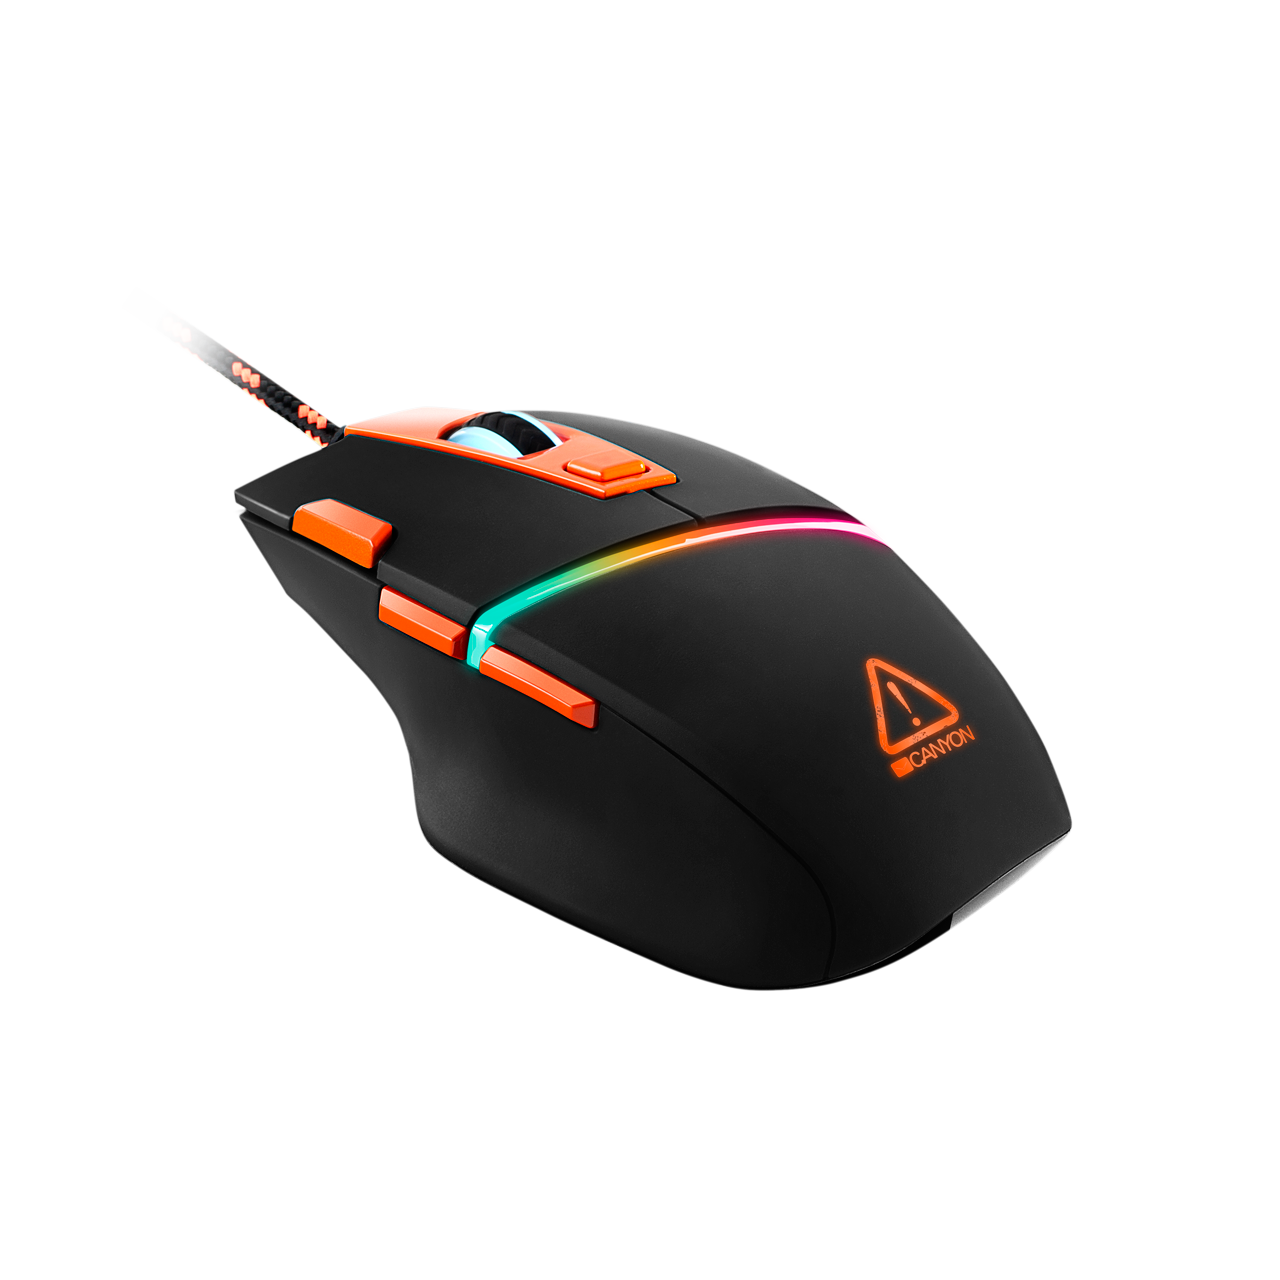 Мышь CANYON Sulaco GM-4 Wired Gaming Mouse with 7 programmable buttons, Pixart sensor of new generation, - фото 3 - id-p94642508